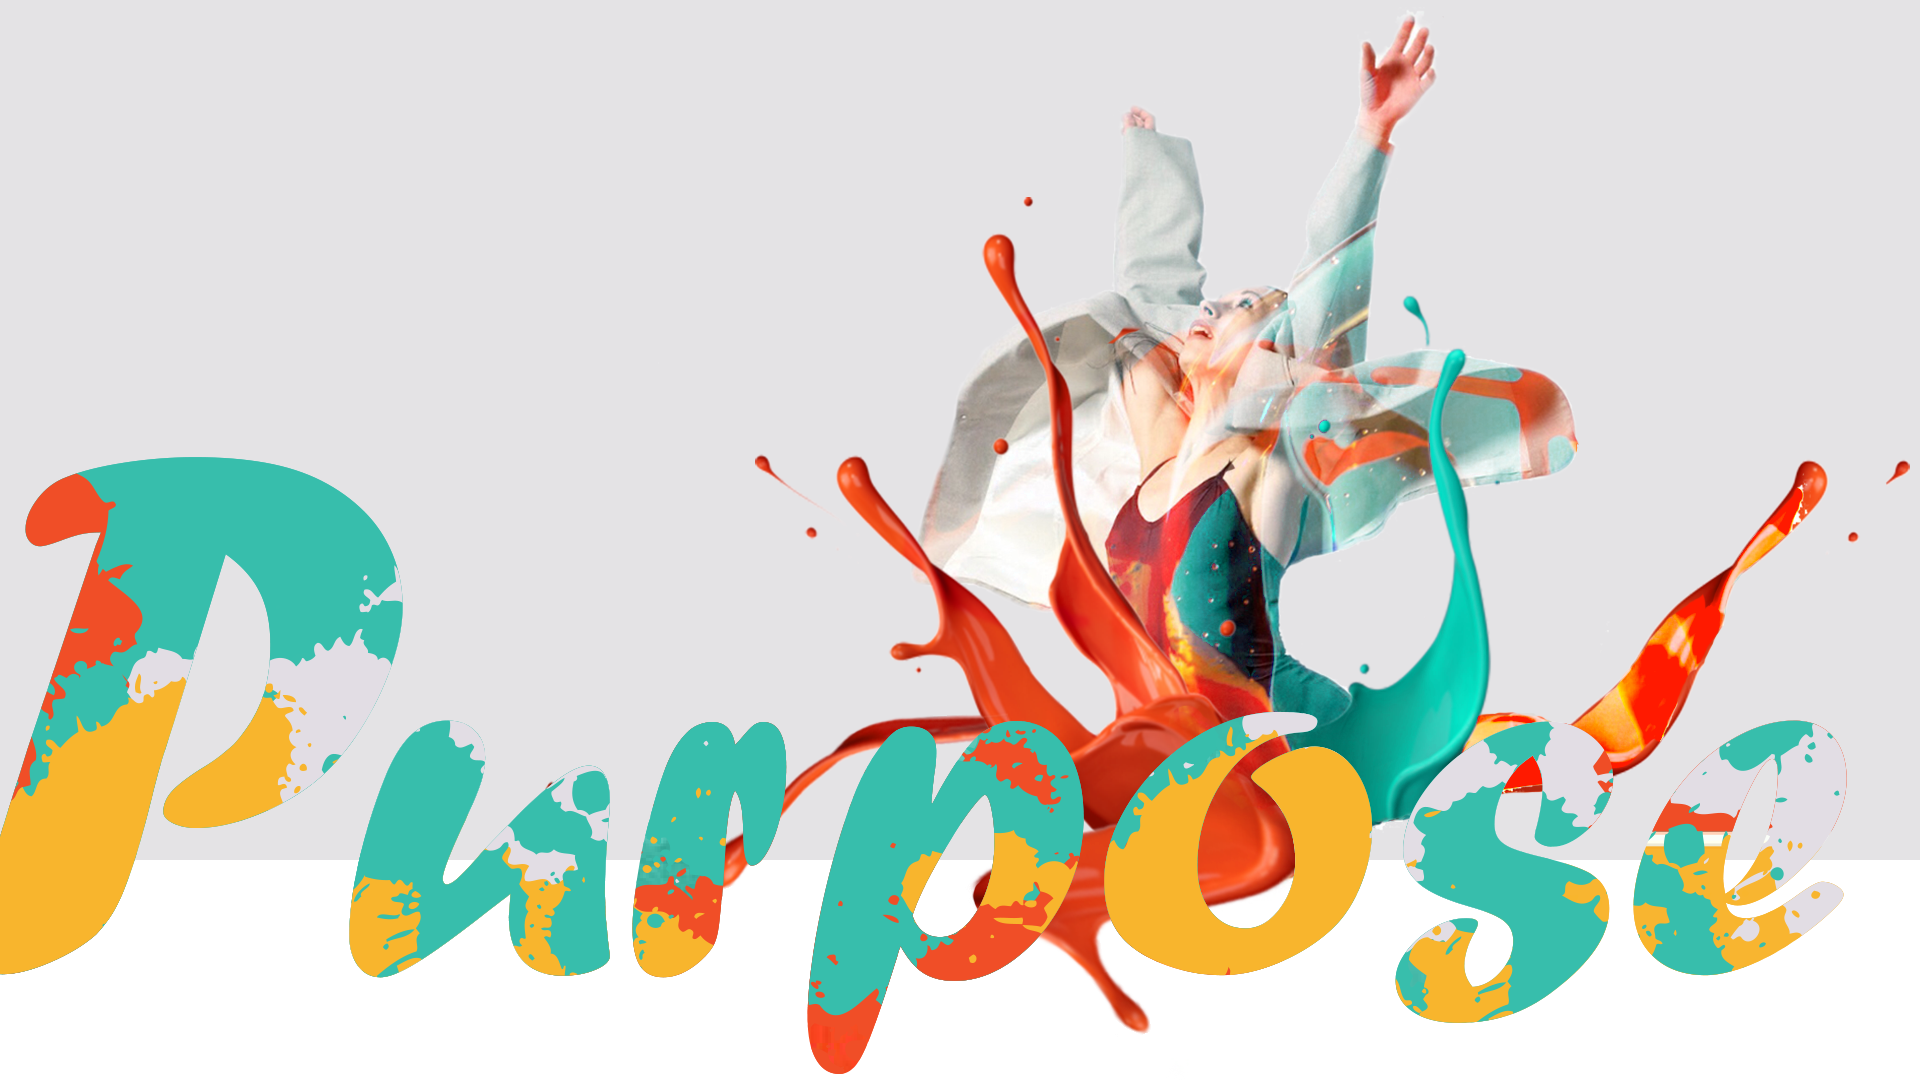 PixelUp has created an eye-catching representation featuring vibrant custom lettering spelling out the word 'Purpose' in shades of orange, red, and teal. This typography stands out against a gentle purple background, with a joyful woman depicted from the waist up, appearing as if she's leaping upwards. This distinct typographic arrangement serves as the header image for a key service page on the Grow Yourself Space Project website, a specialized design crafted by PixelUp specifically for evolutionary coaches.